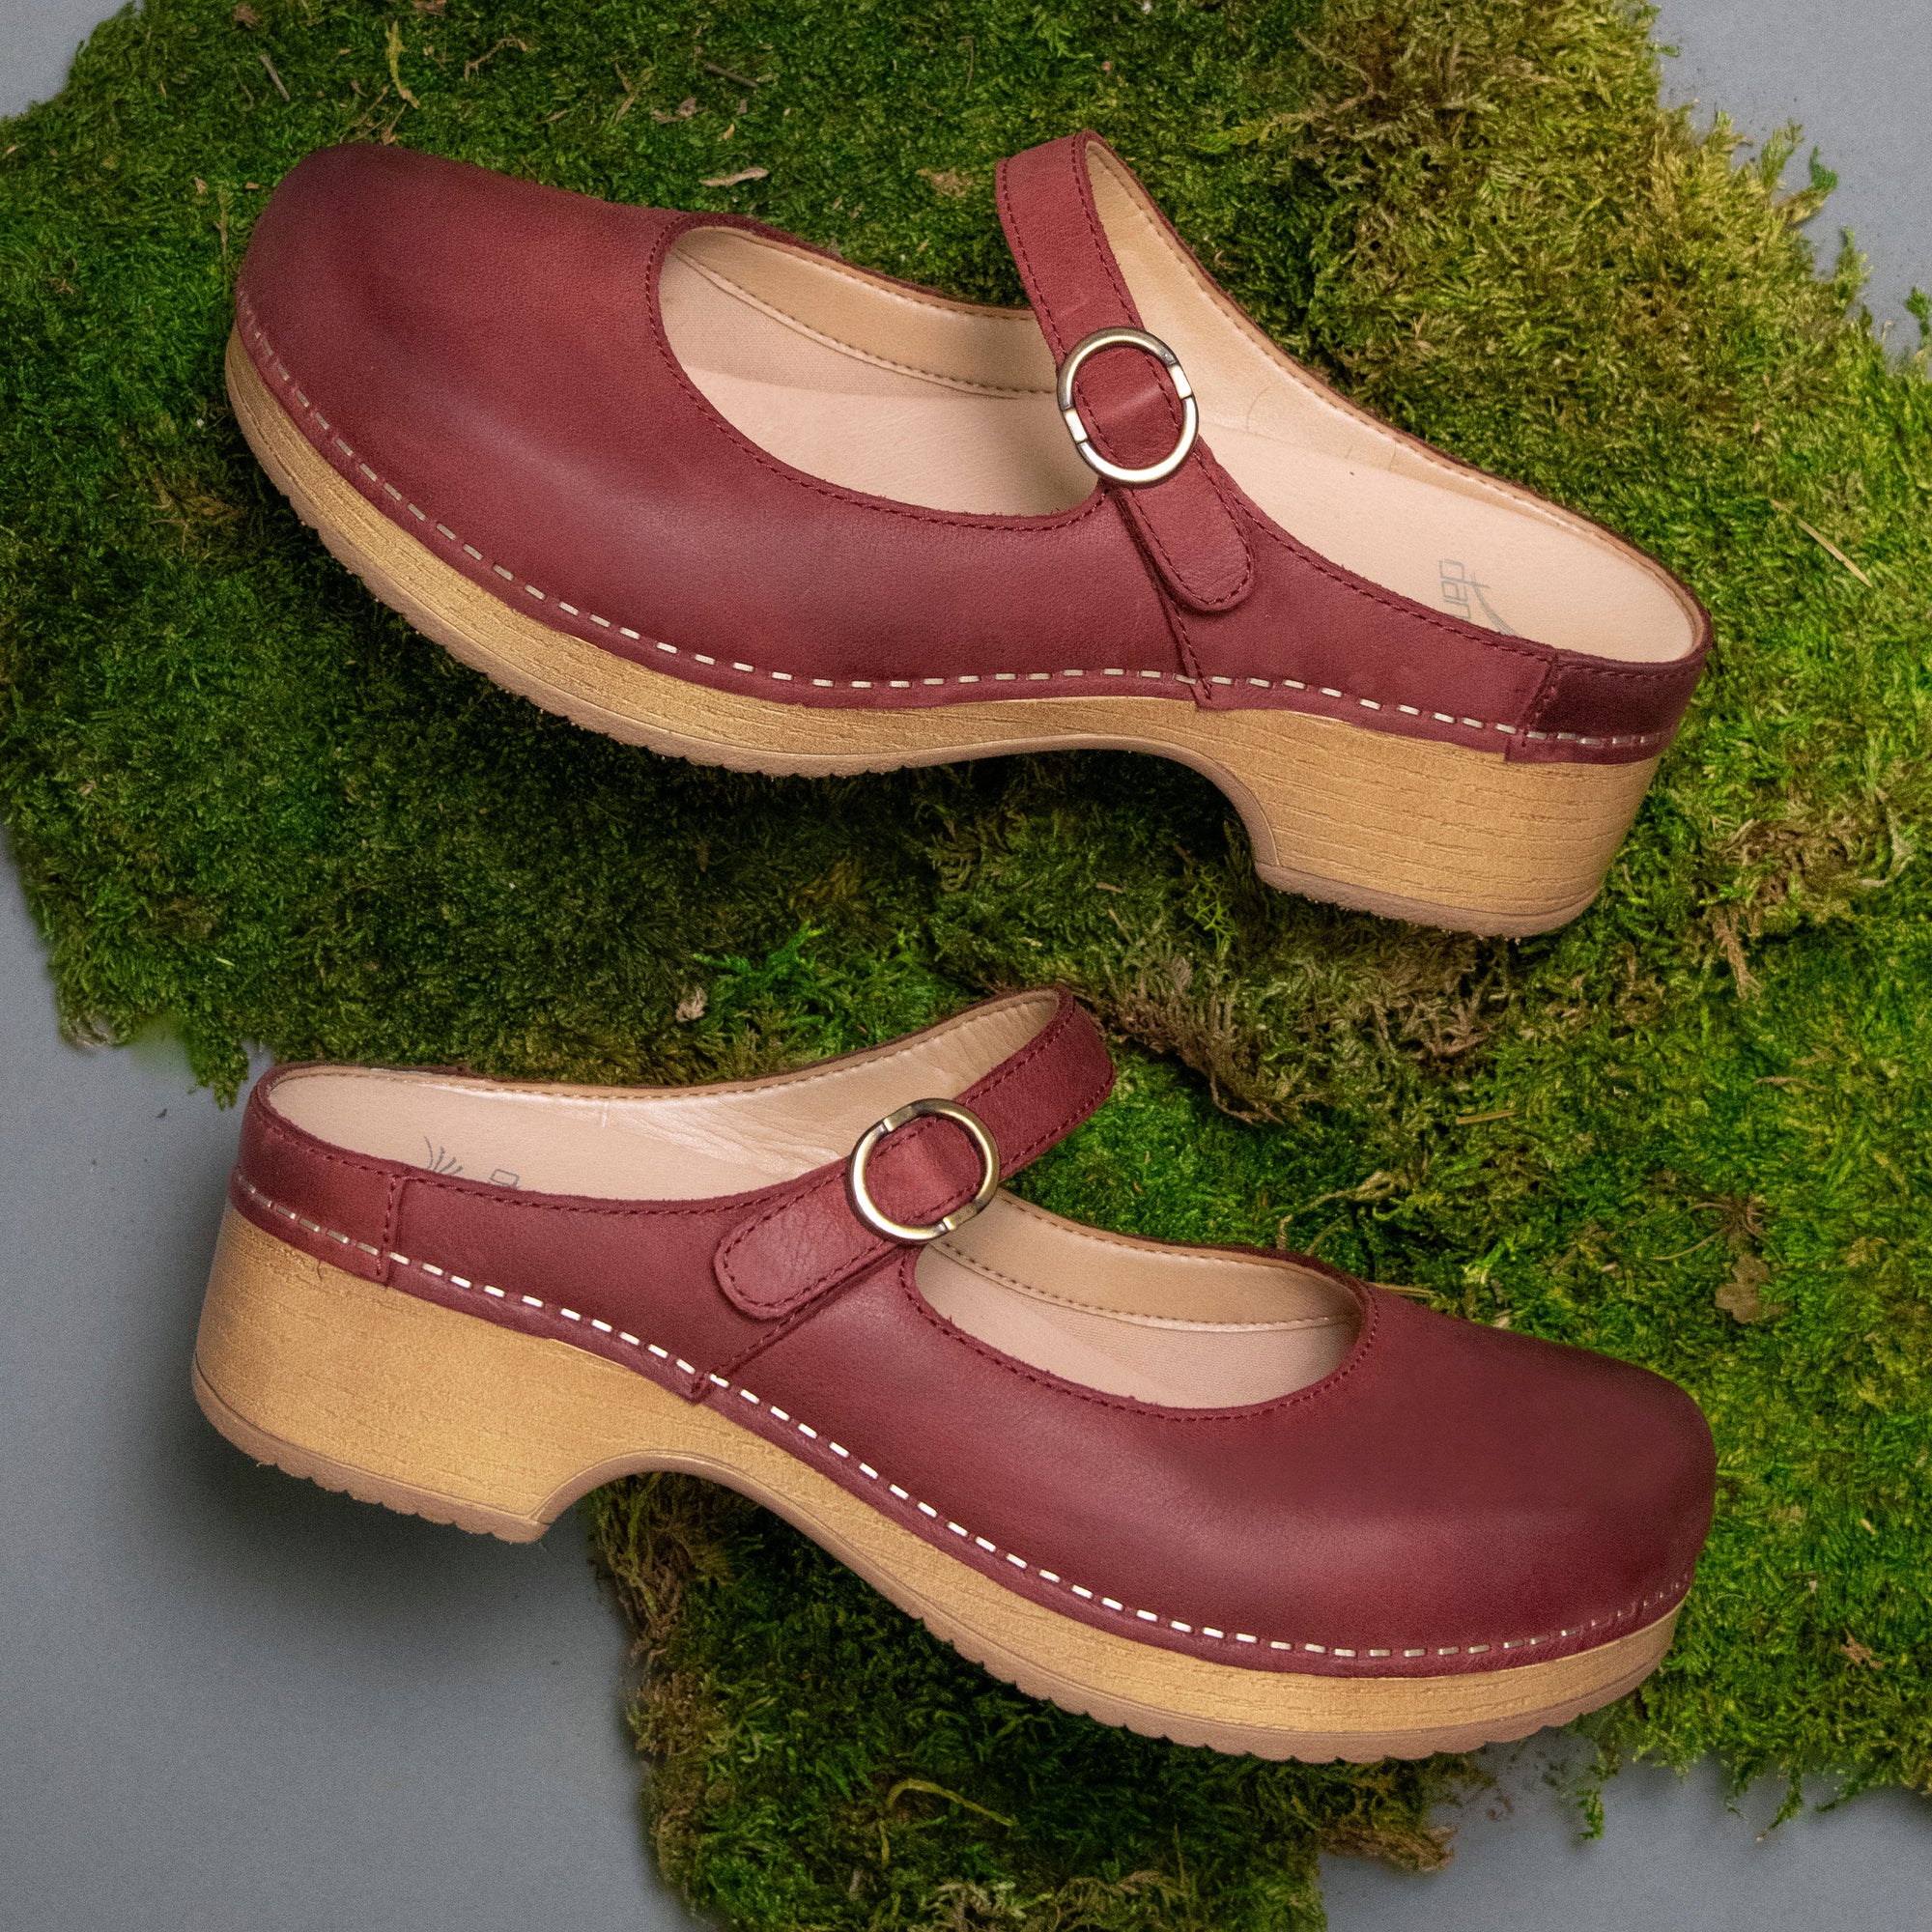 Mary Jane mule clogs in a rich red tone.